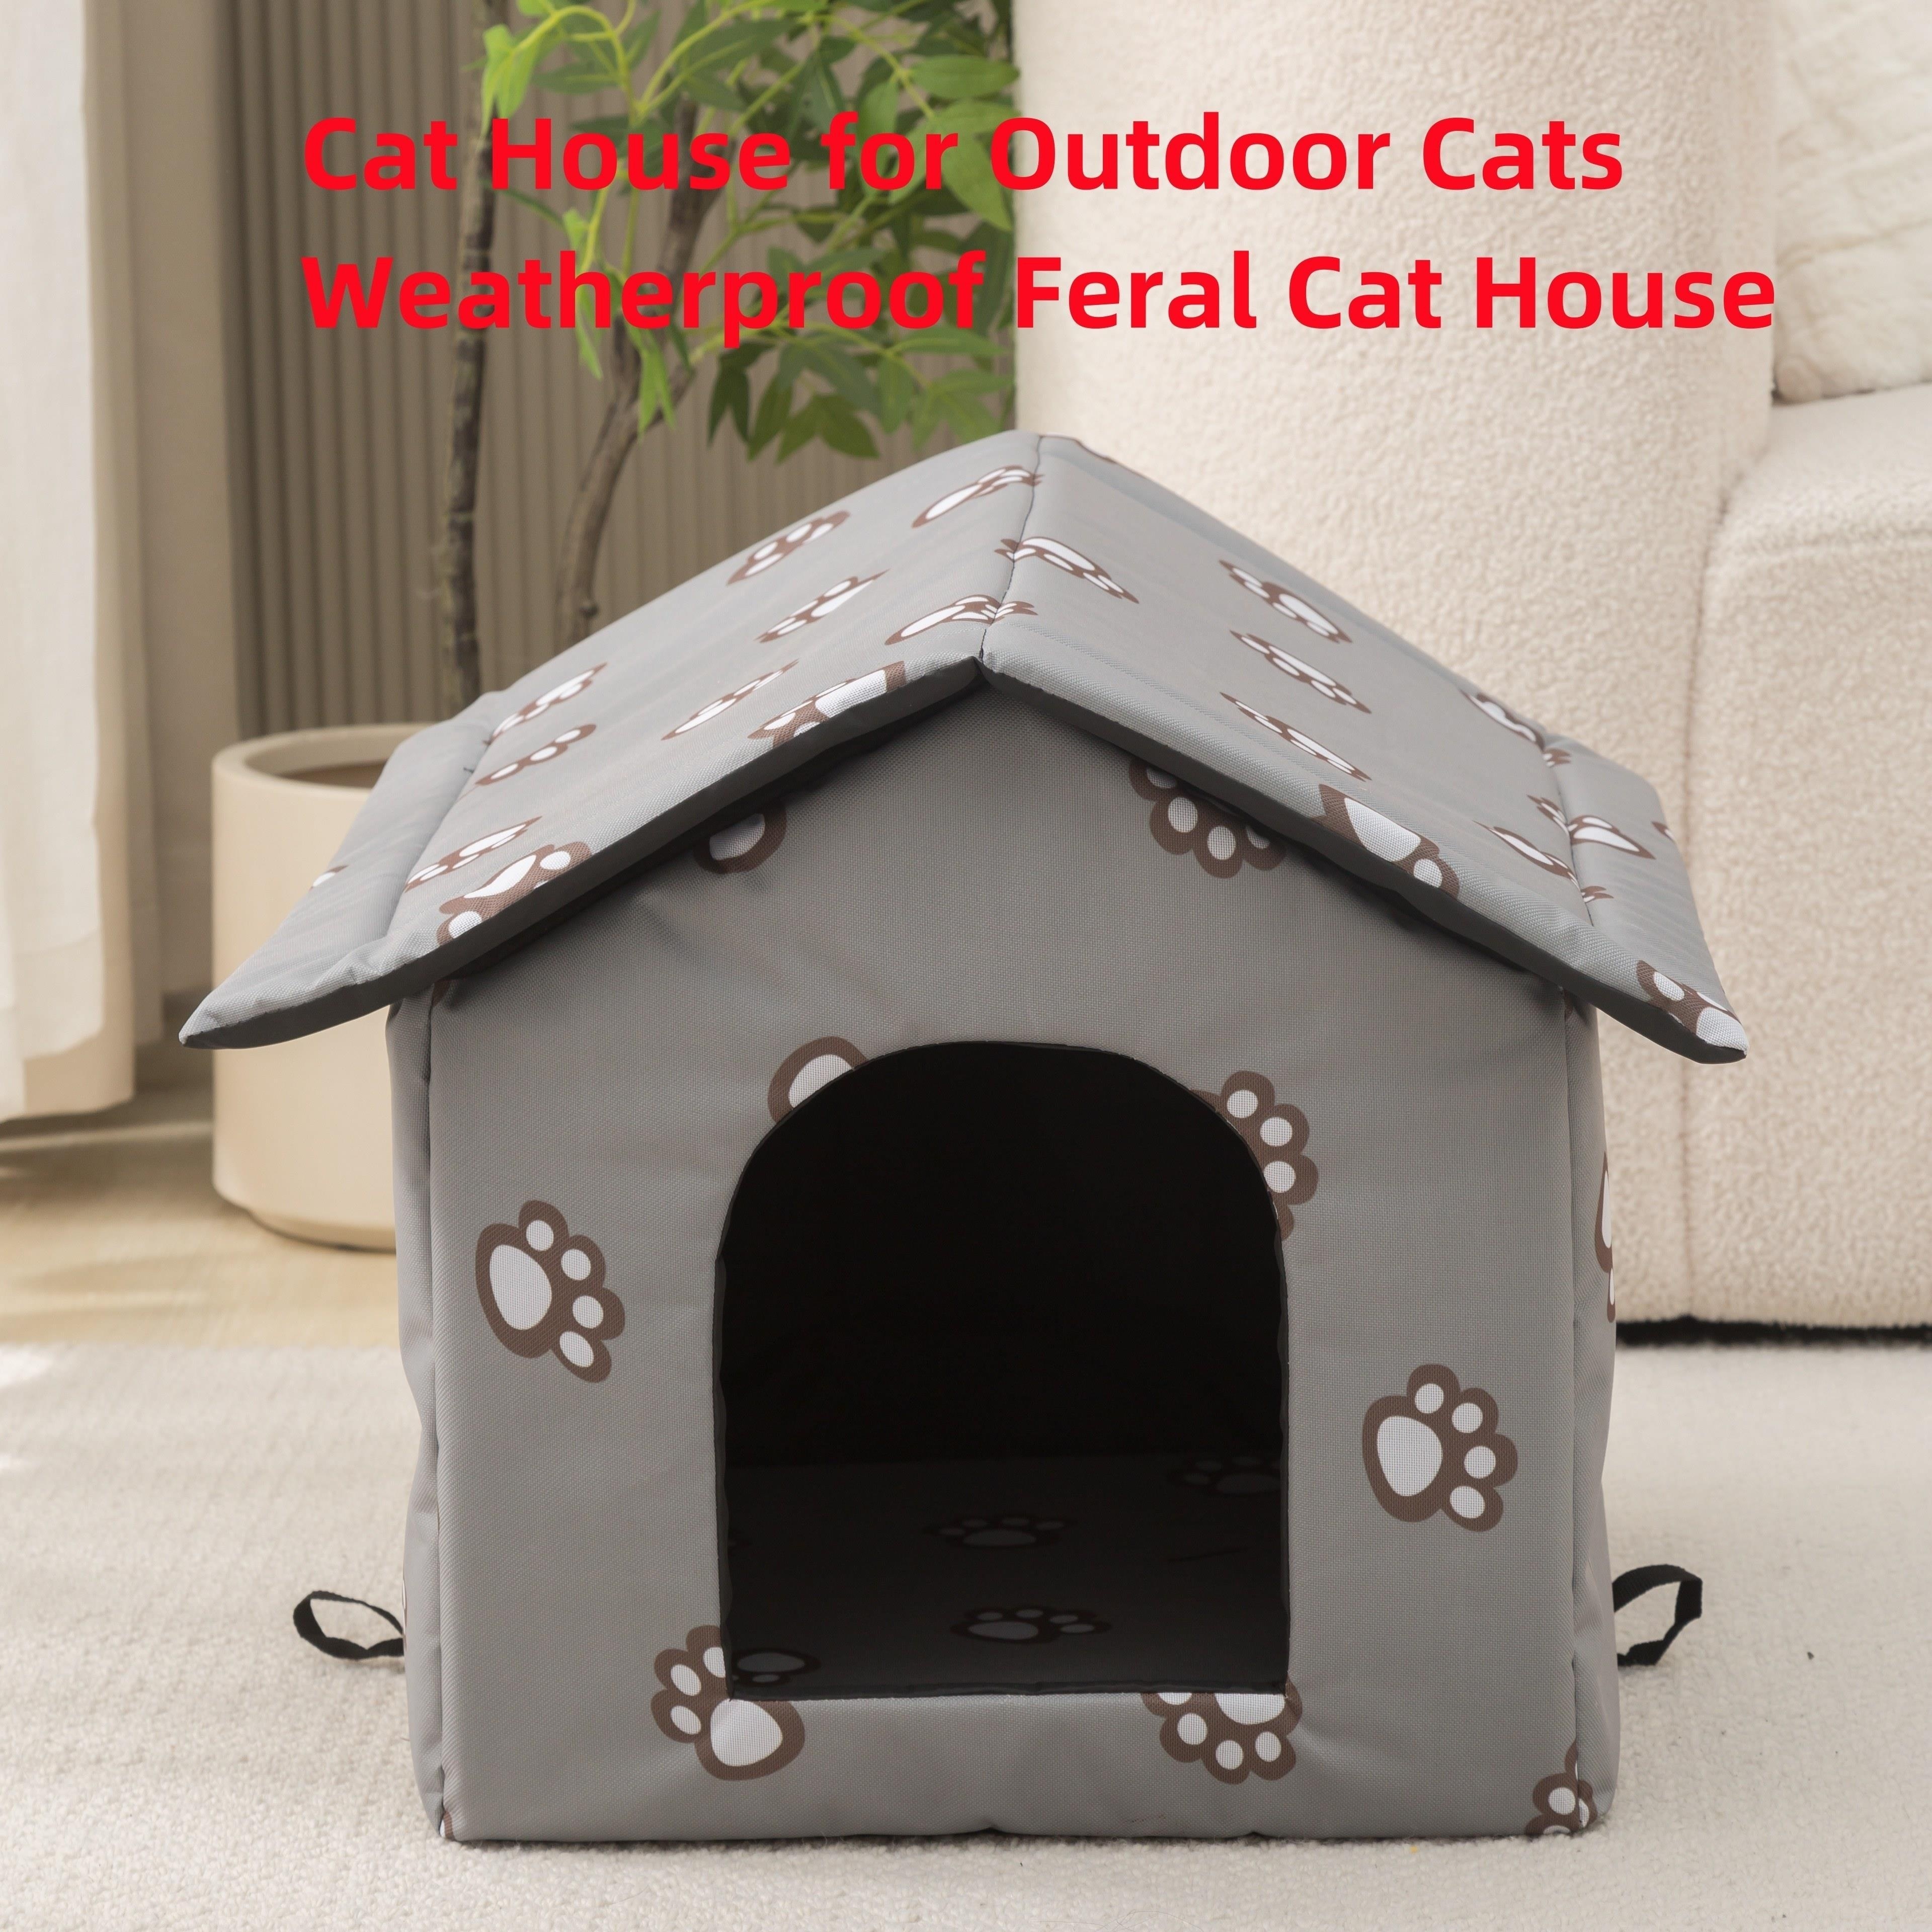 

1pc Pet House, Outdoor Cat Cage, Dog Kennel Shelter, Cat House For Outdoor Cats, Weatherproof Feral Cat House With Mat And Doors, Pet Nest For Winter, Removable And Washable Cat Villa Cage